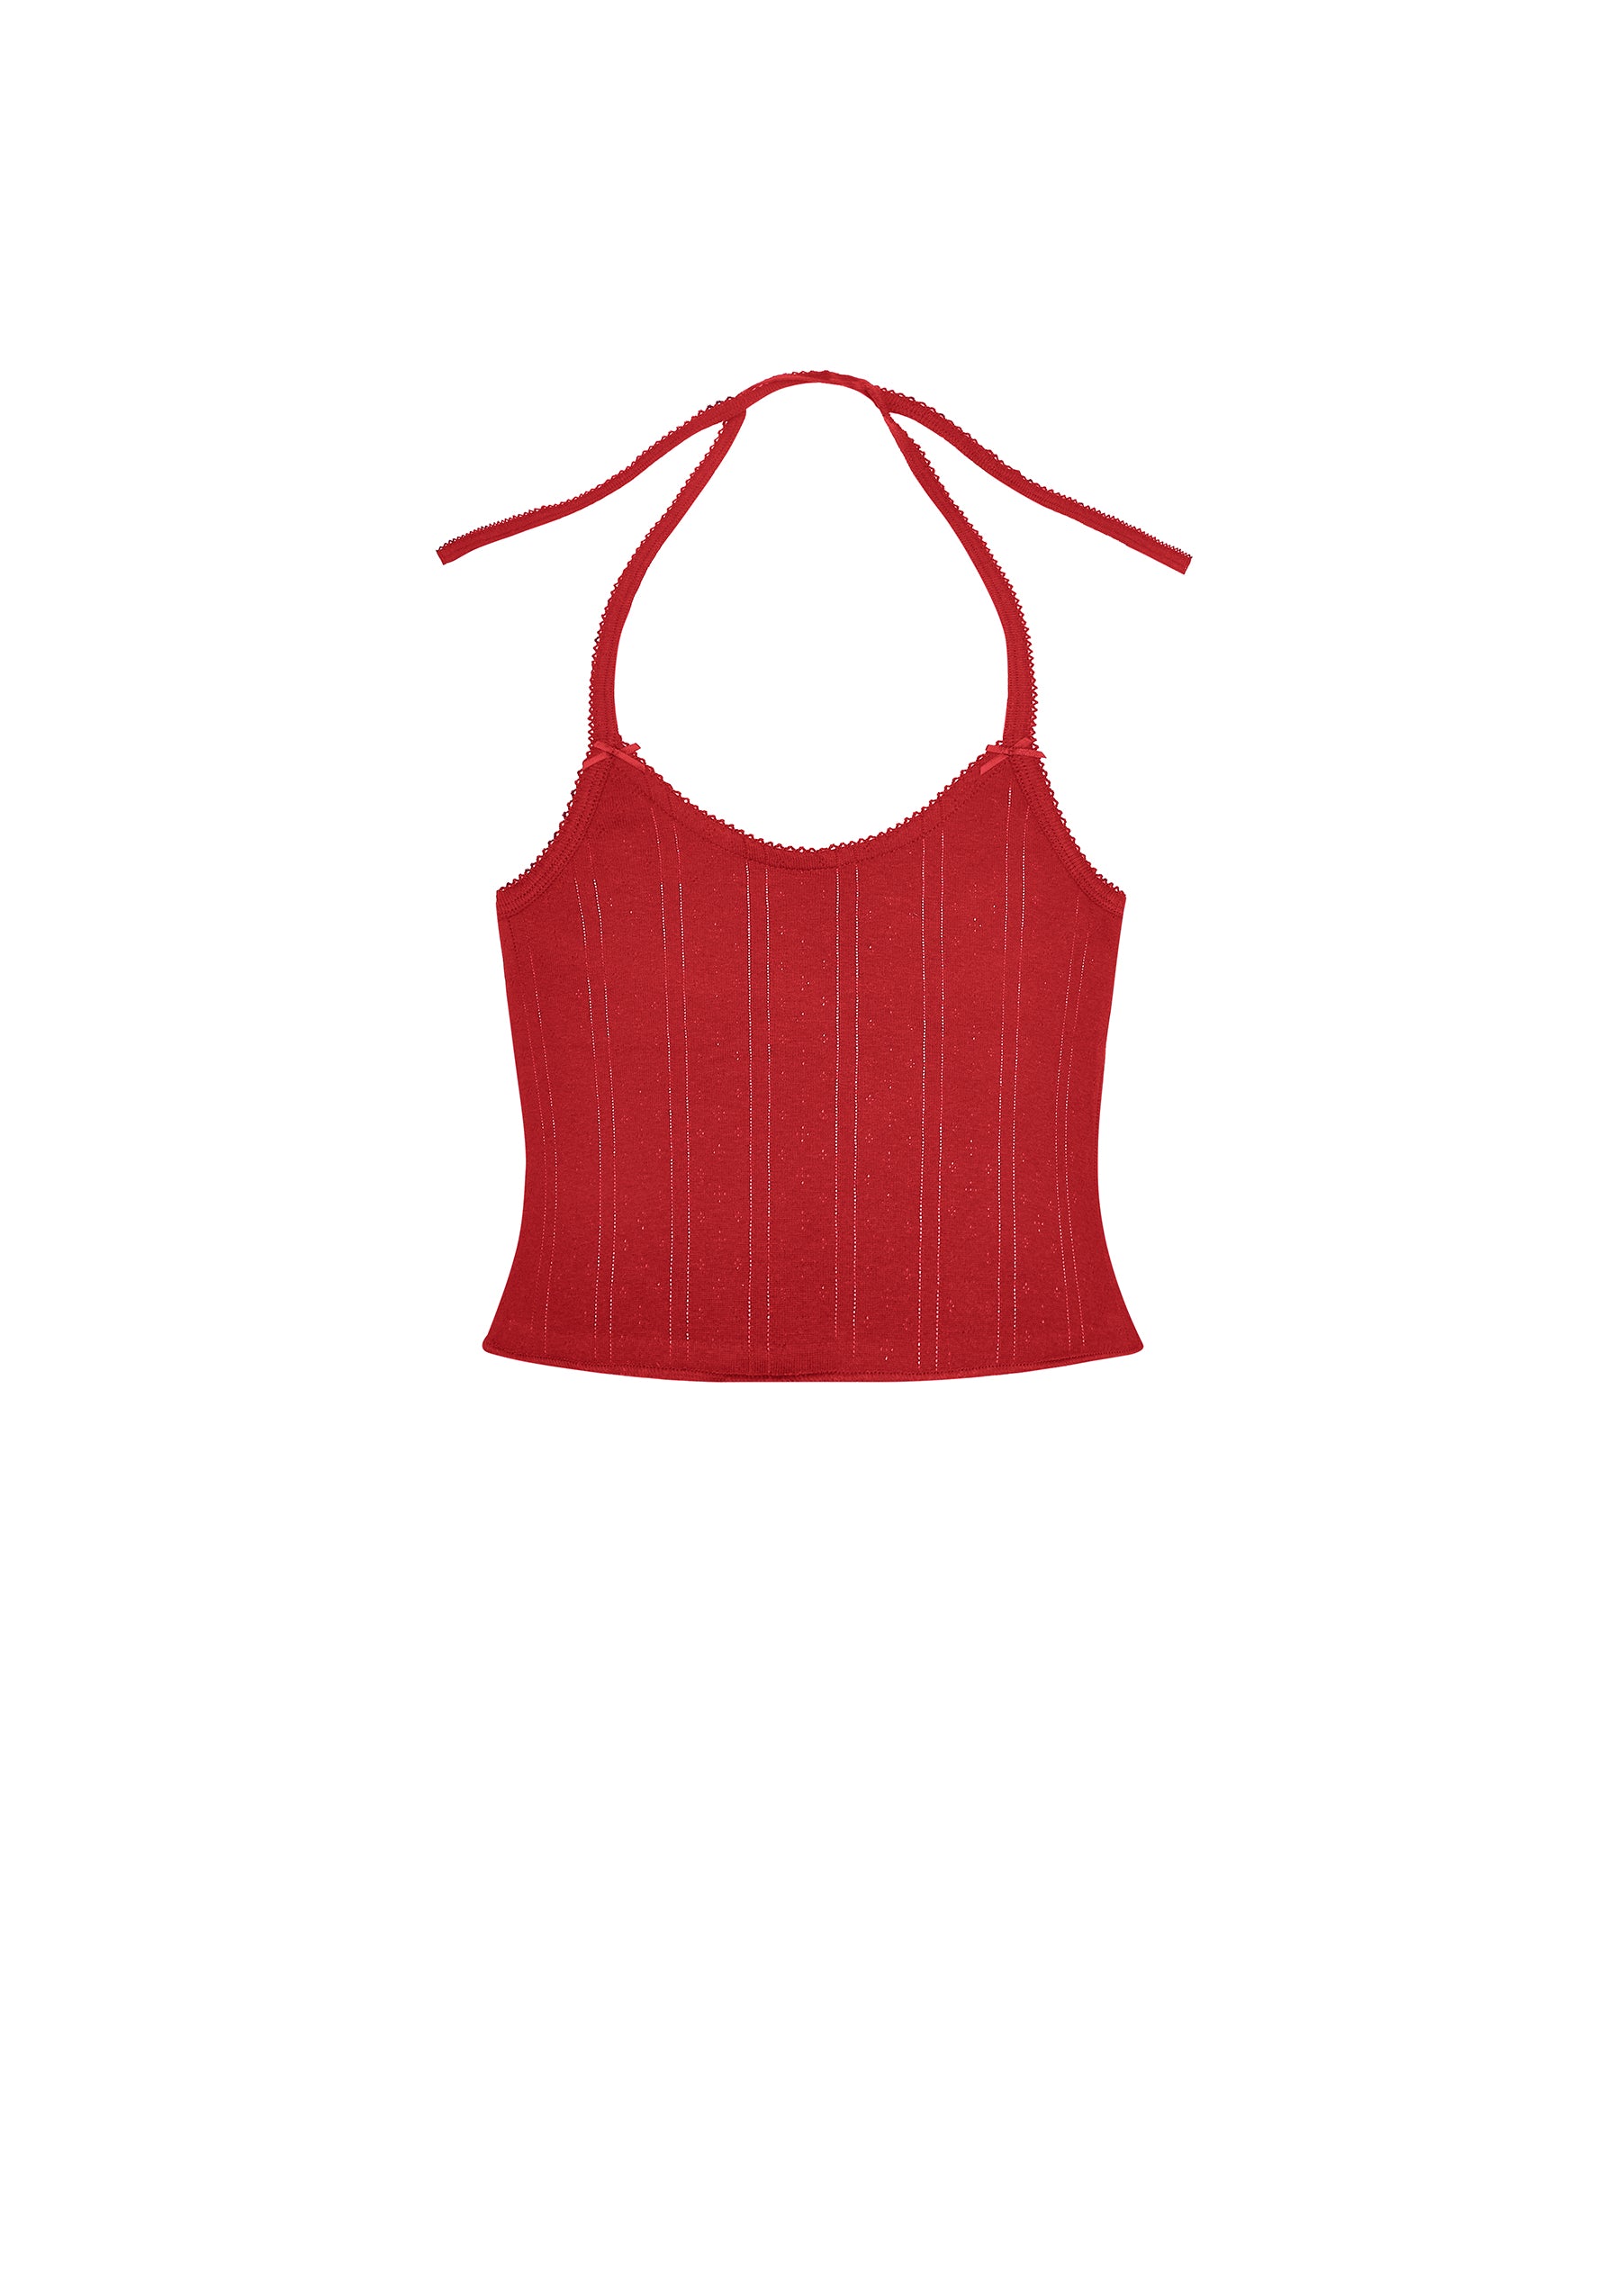 The Halter Cherry Red